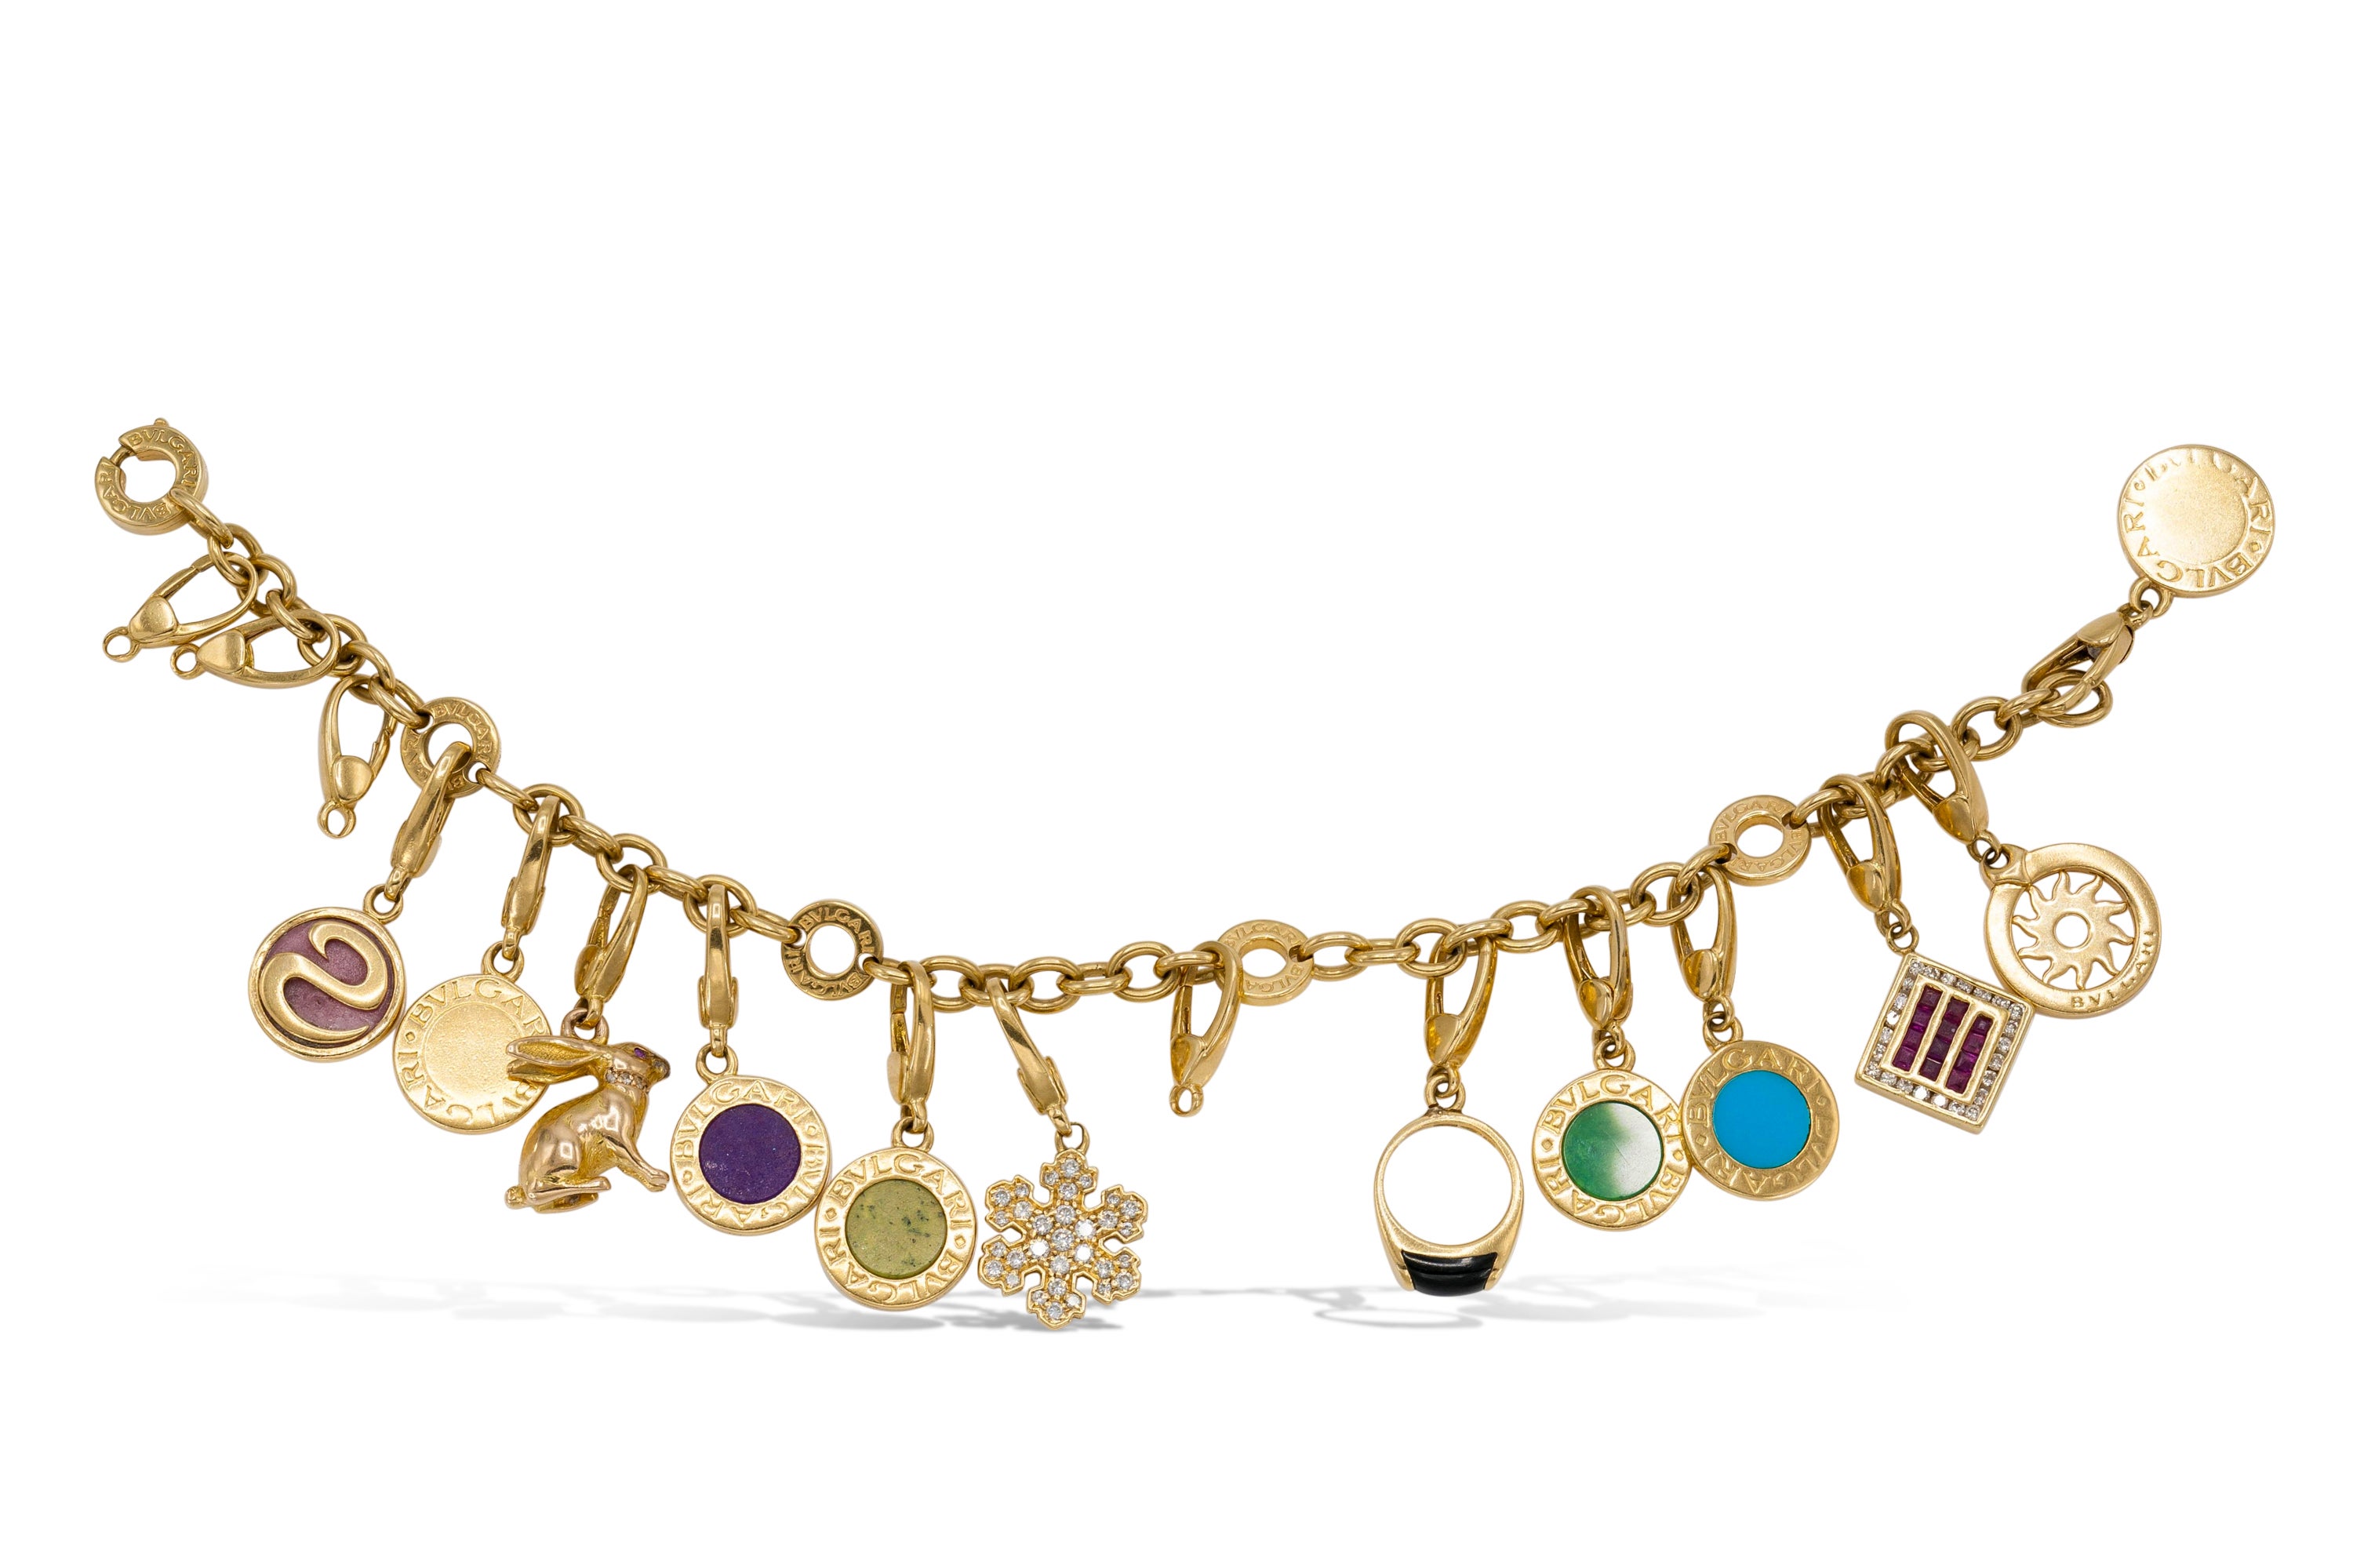 Finely crafted in 18K yellow gold with 12 original Bvlgari charms featuring various precious and semi-precious stones.
Signed by Bvlgari.
Size 7 inches.